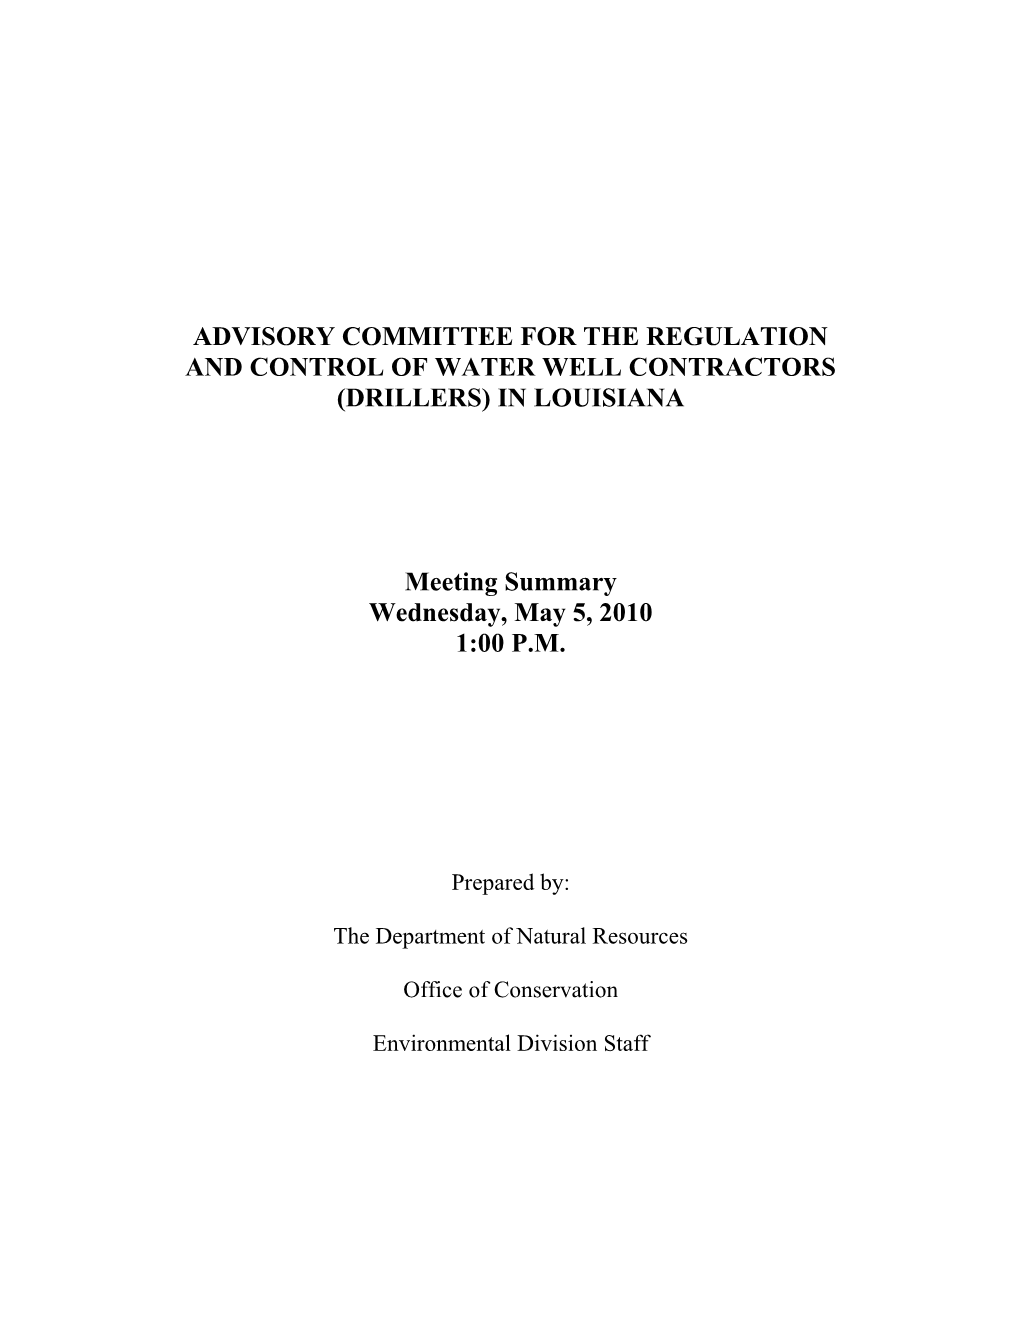 Advisory Committee for the Regulation